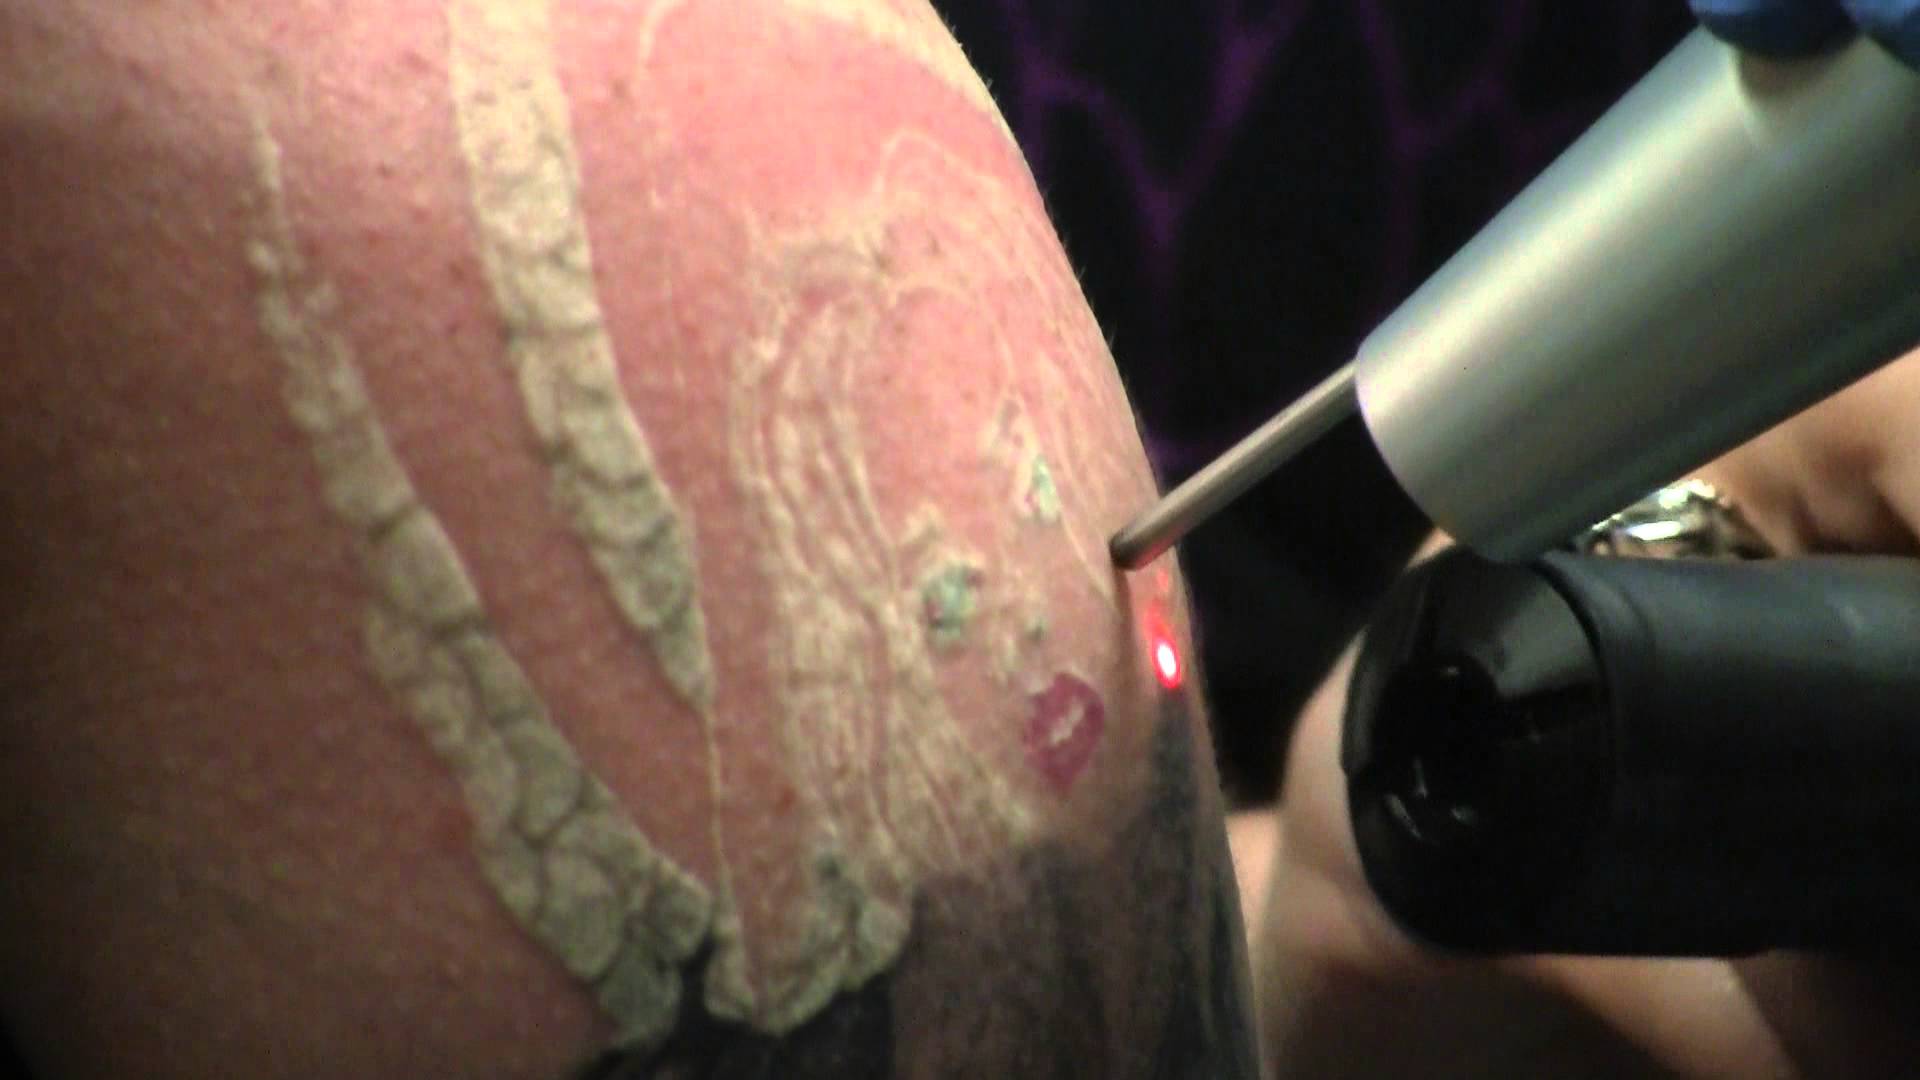 Laser Tattoo Removal - How Painful is it and What's the procedure? |  Dermalife Blog